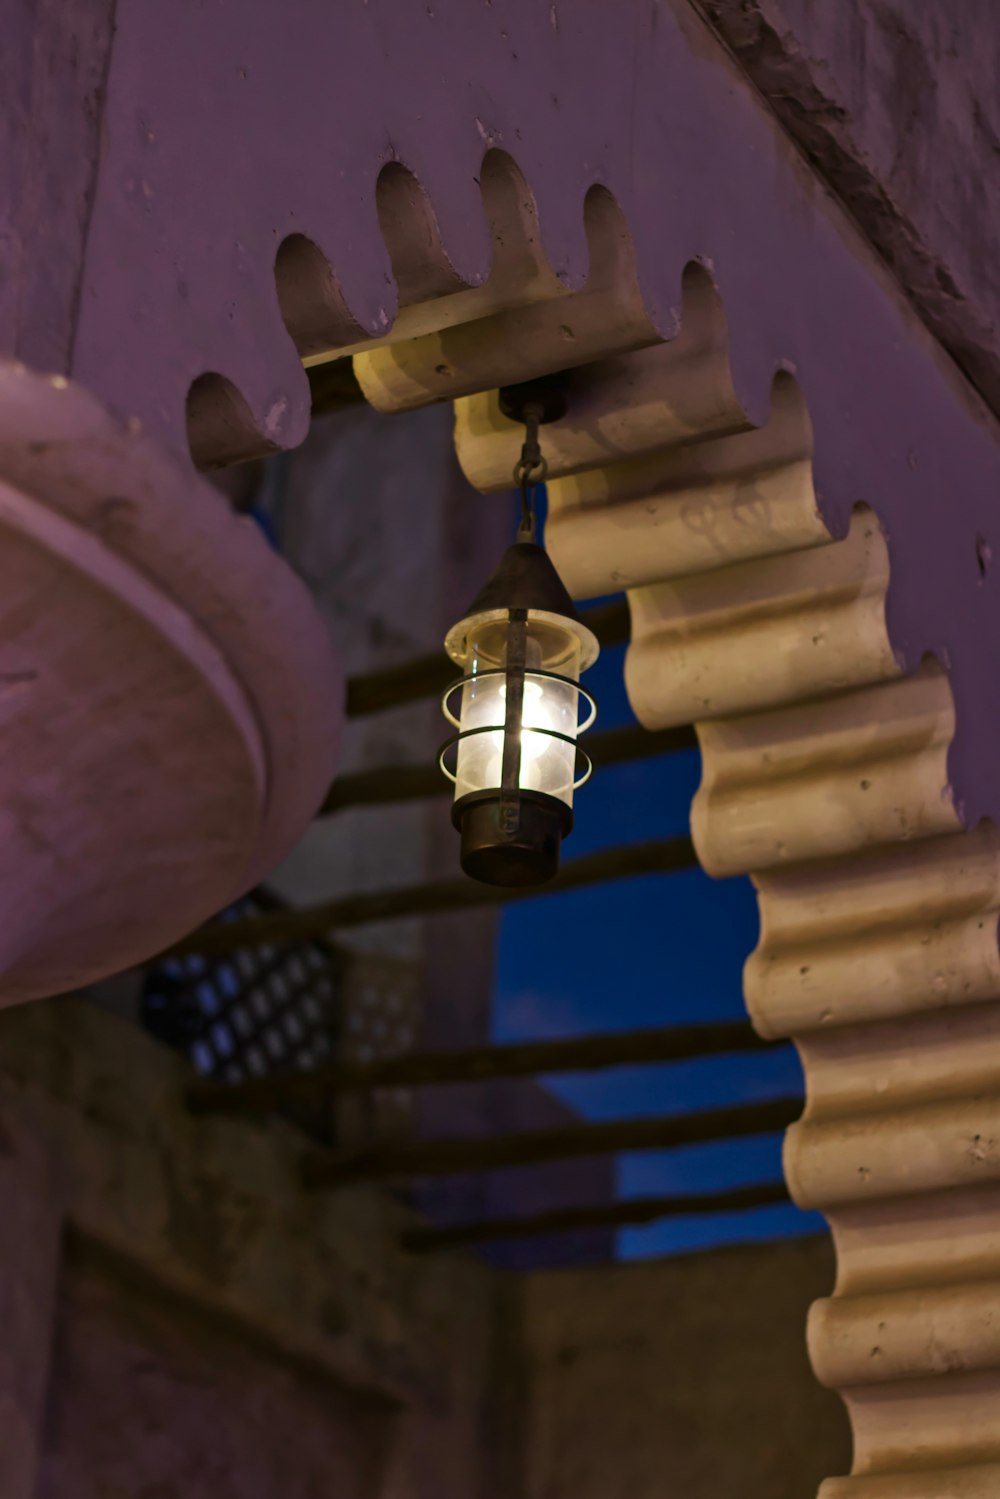 a lantern hanging from a ceiling in a building